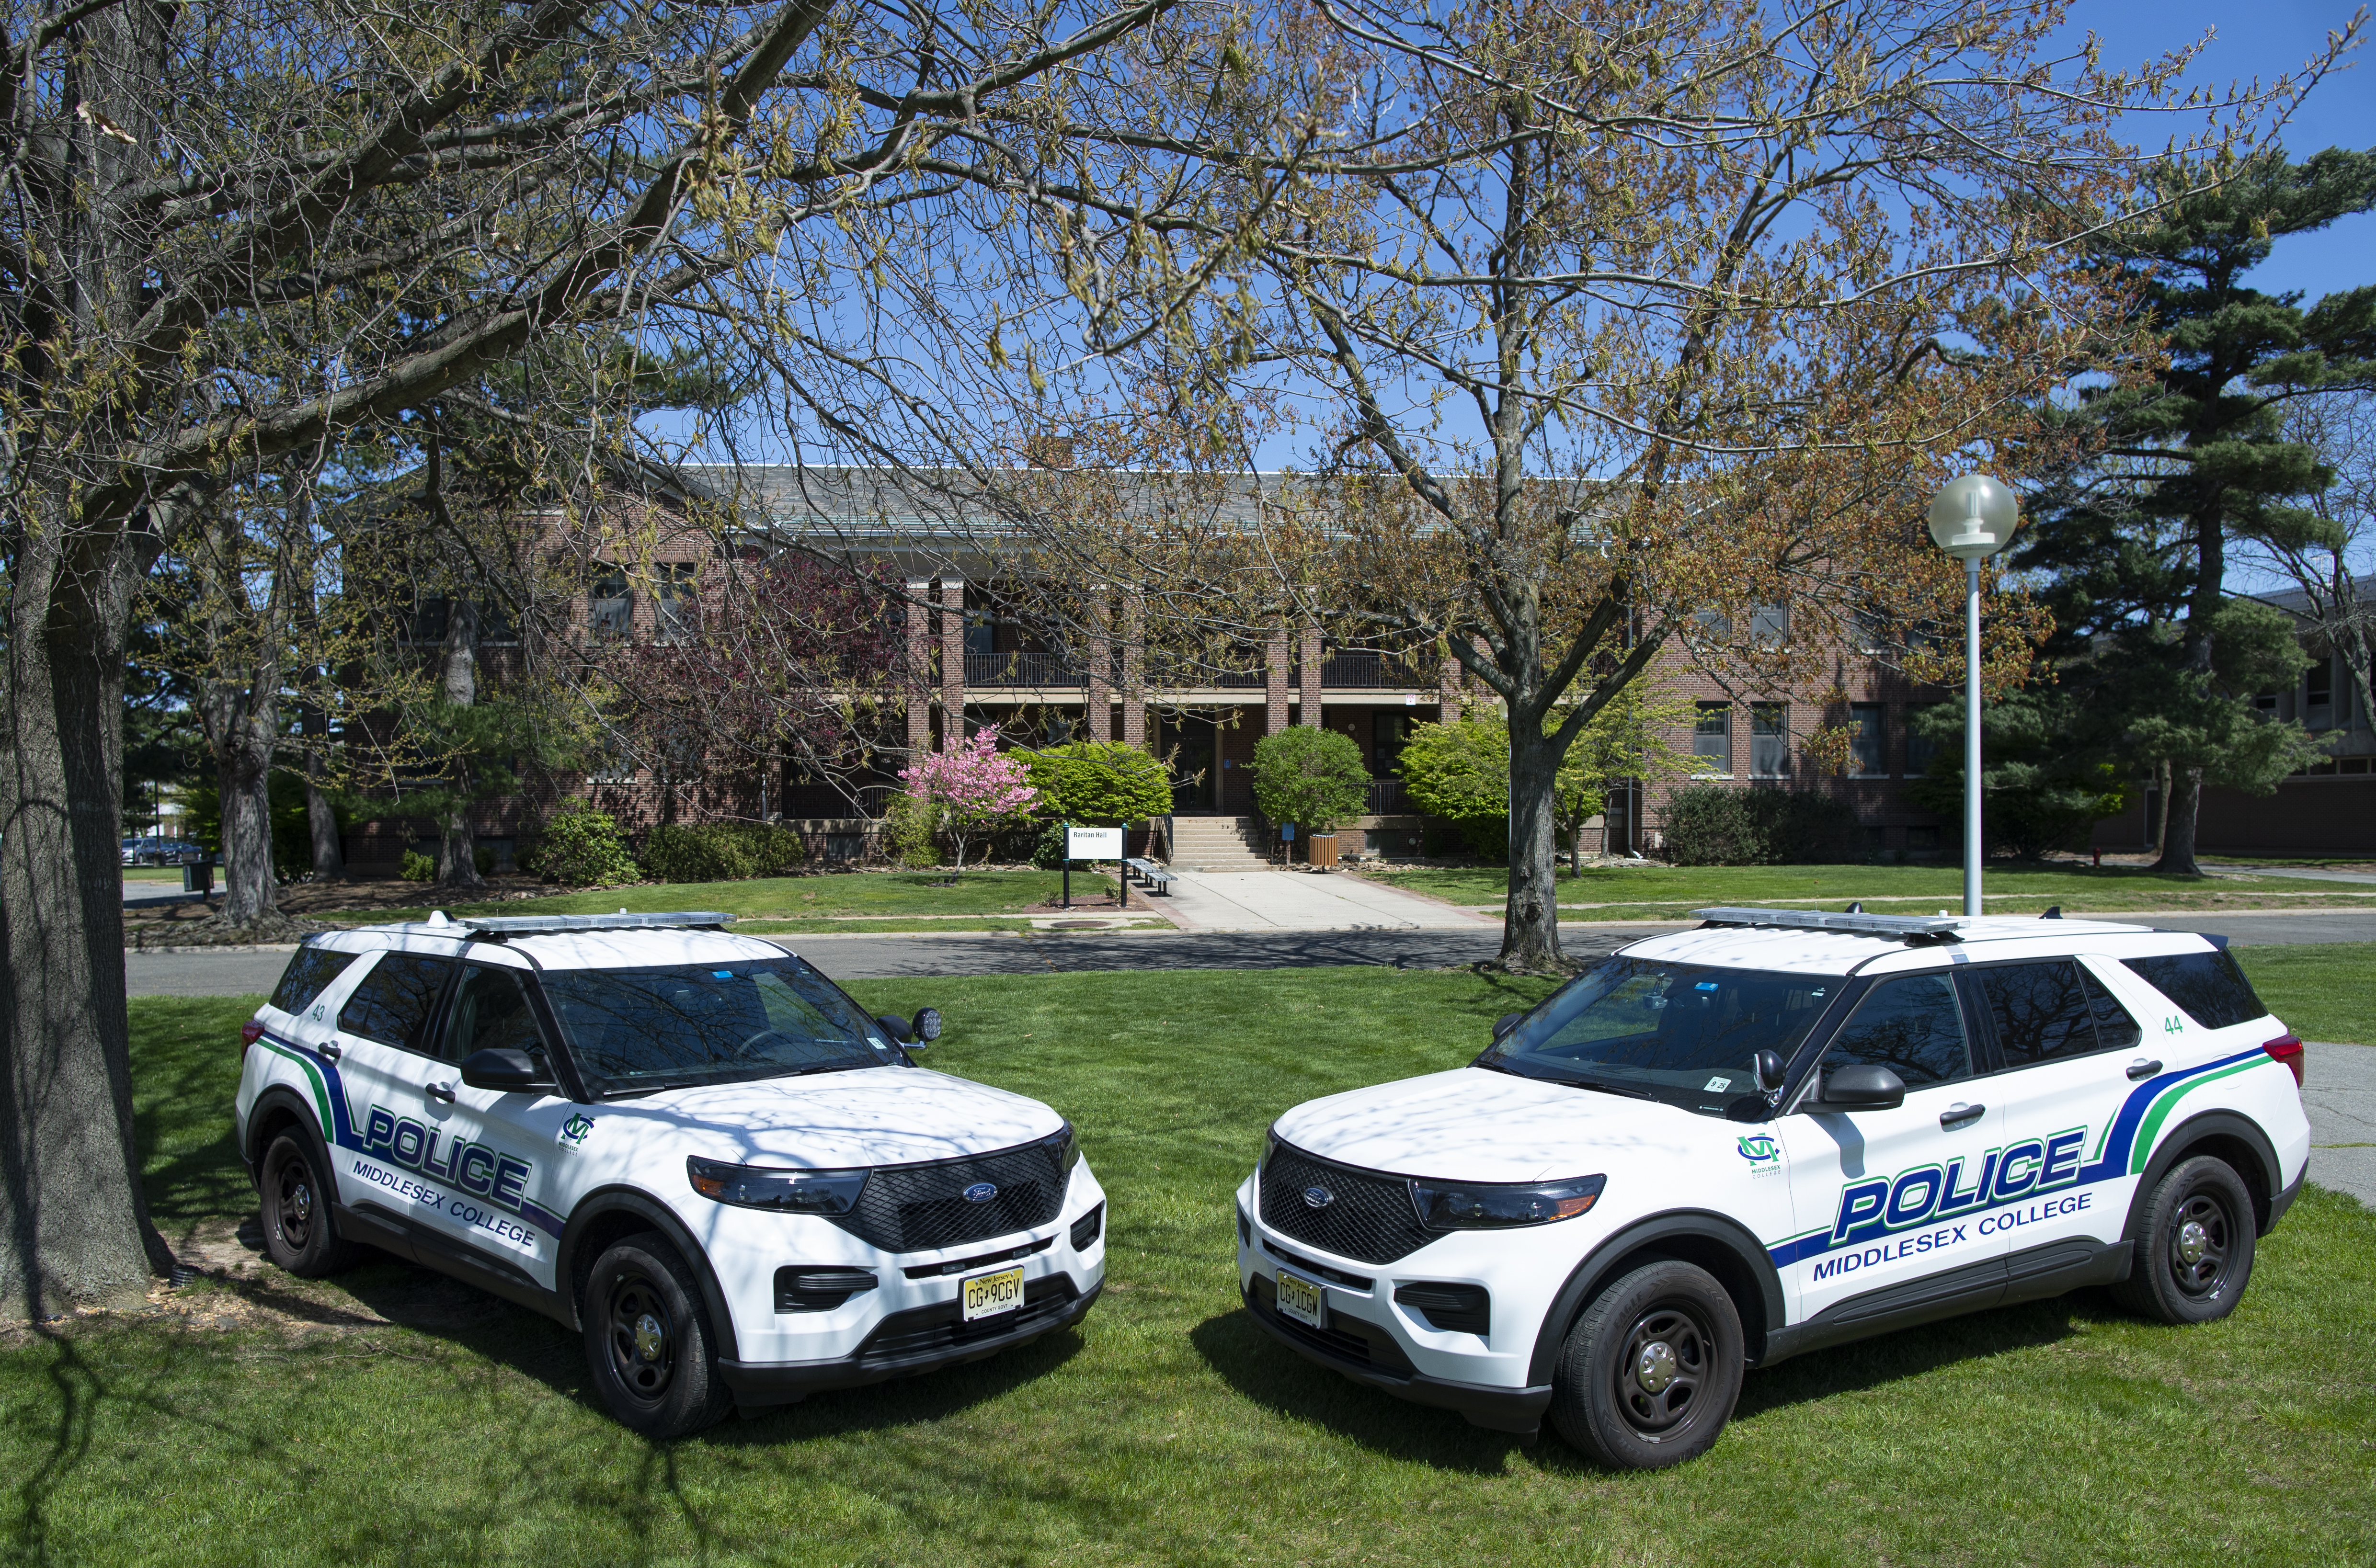 Middlesex College Police Department, NJ Police Jobs